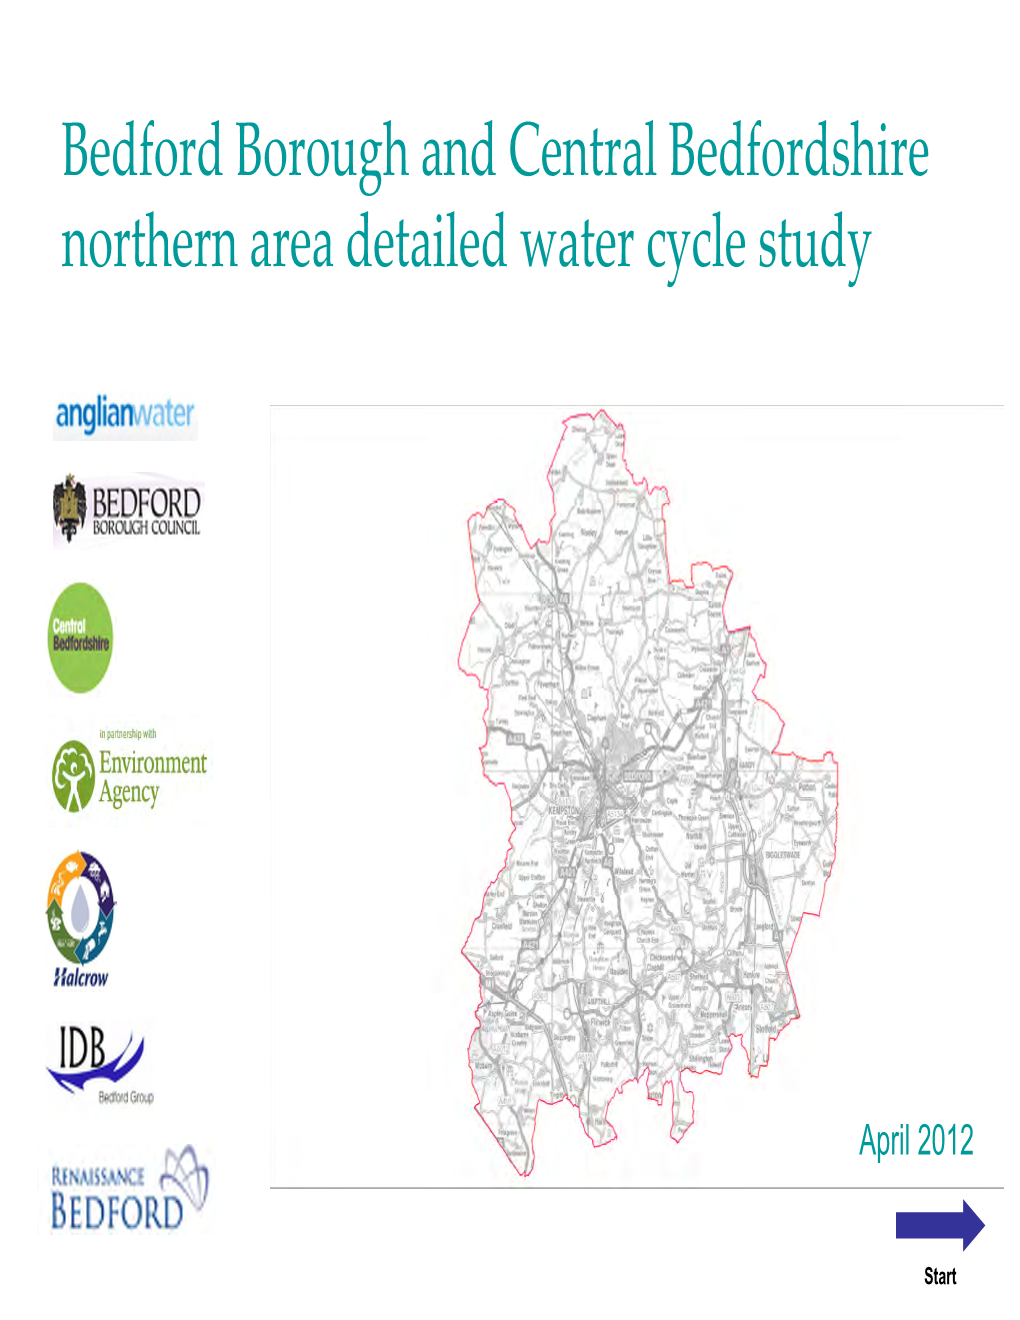 Bedford Borough and Central Bedfordshire Northern Area Detailed Water Cycle Study